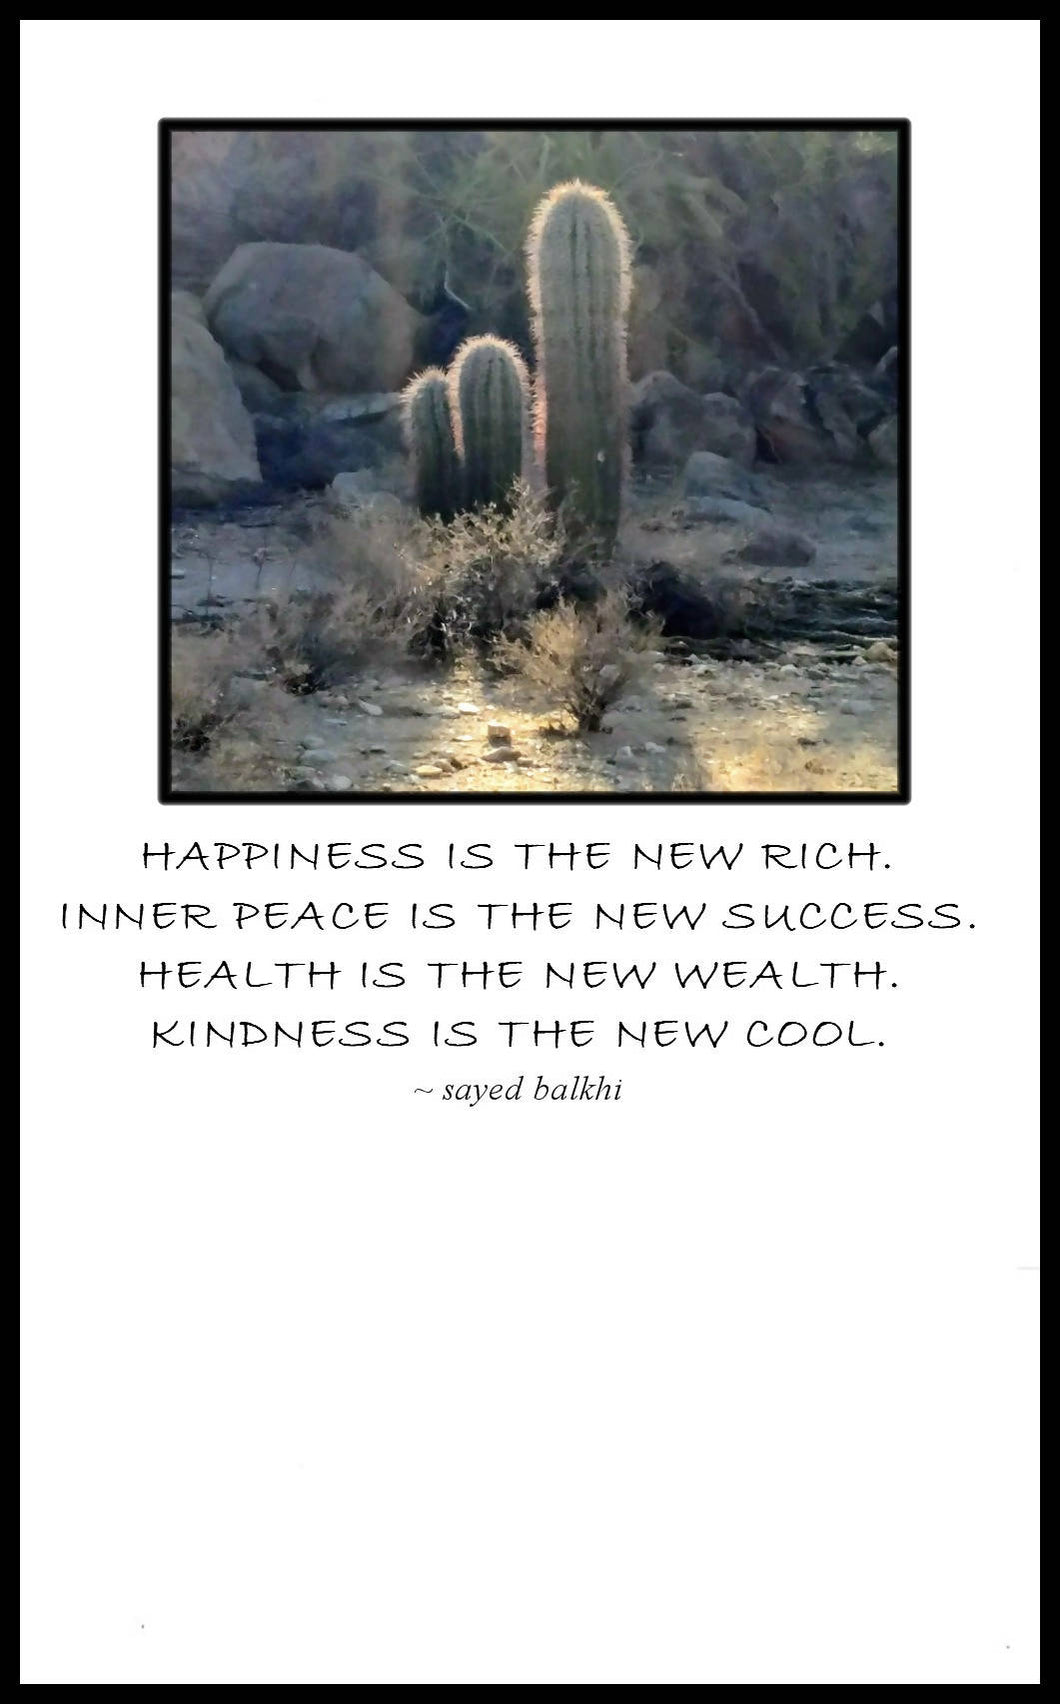 HAPPINESS IS THE NEW RICH